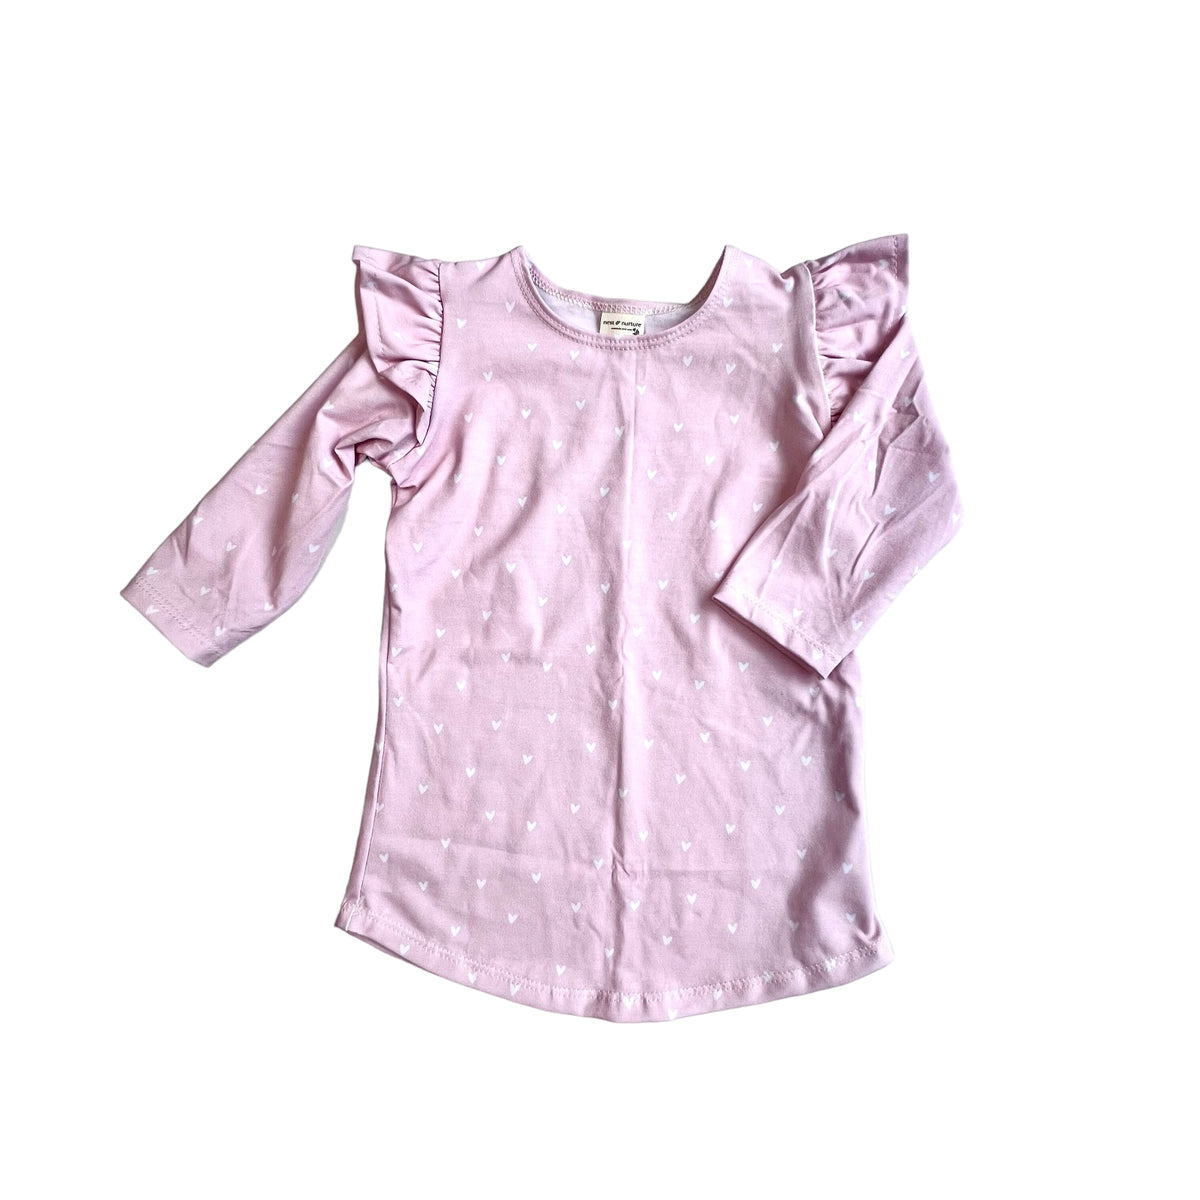 Millie Flutter Shirt in 'Dainty Hearts' - Ready To Ship